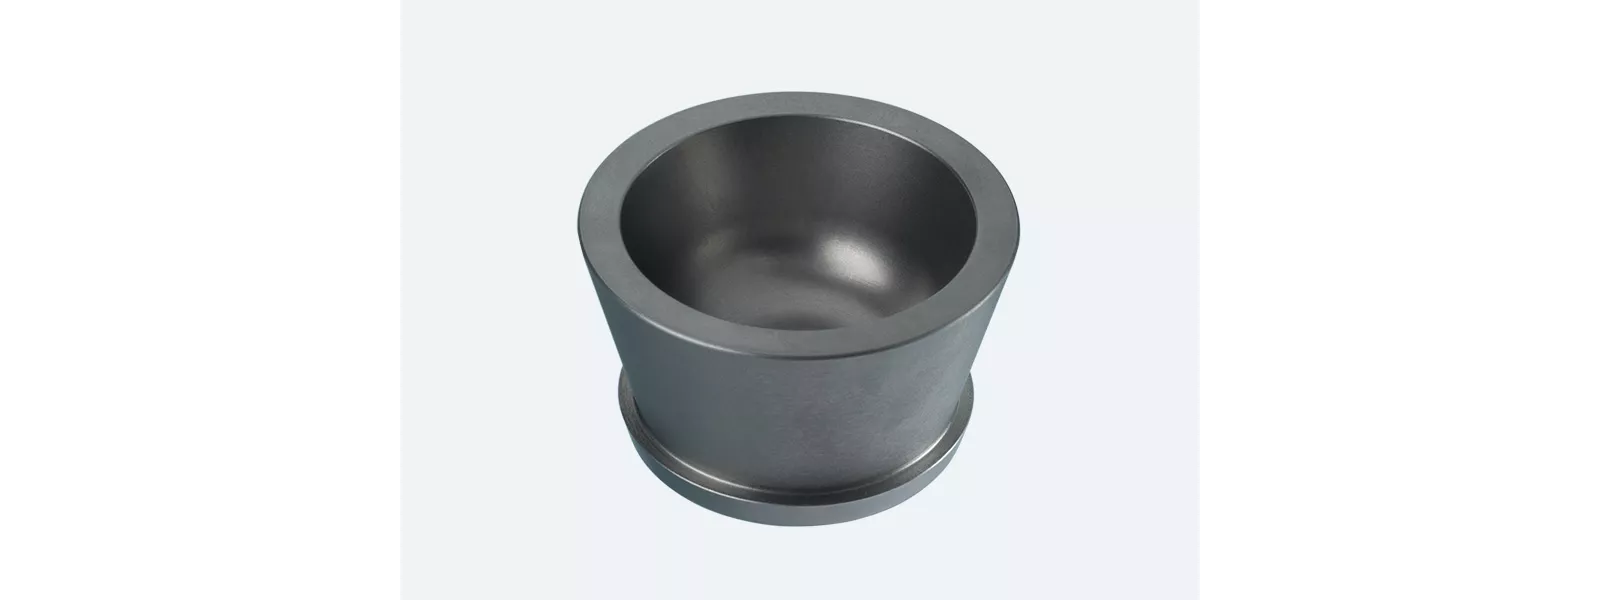 Crucible insert for electron beam evaporation